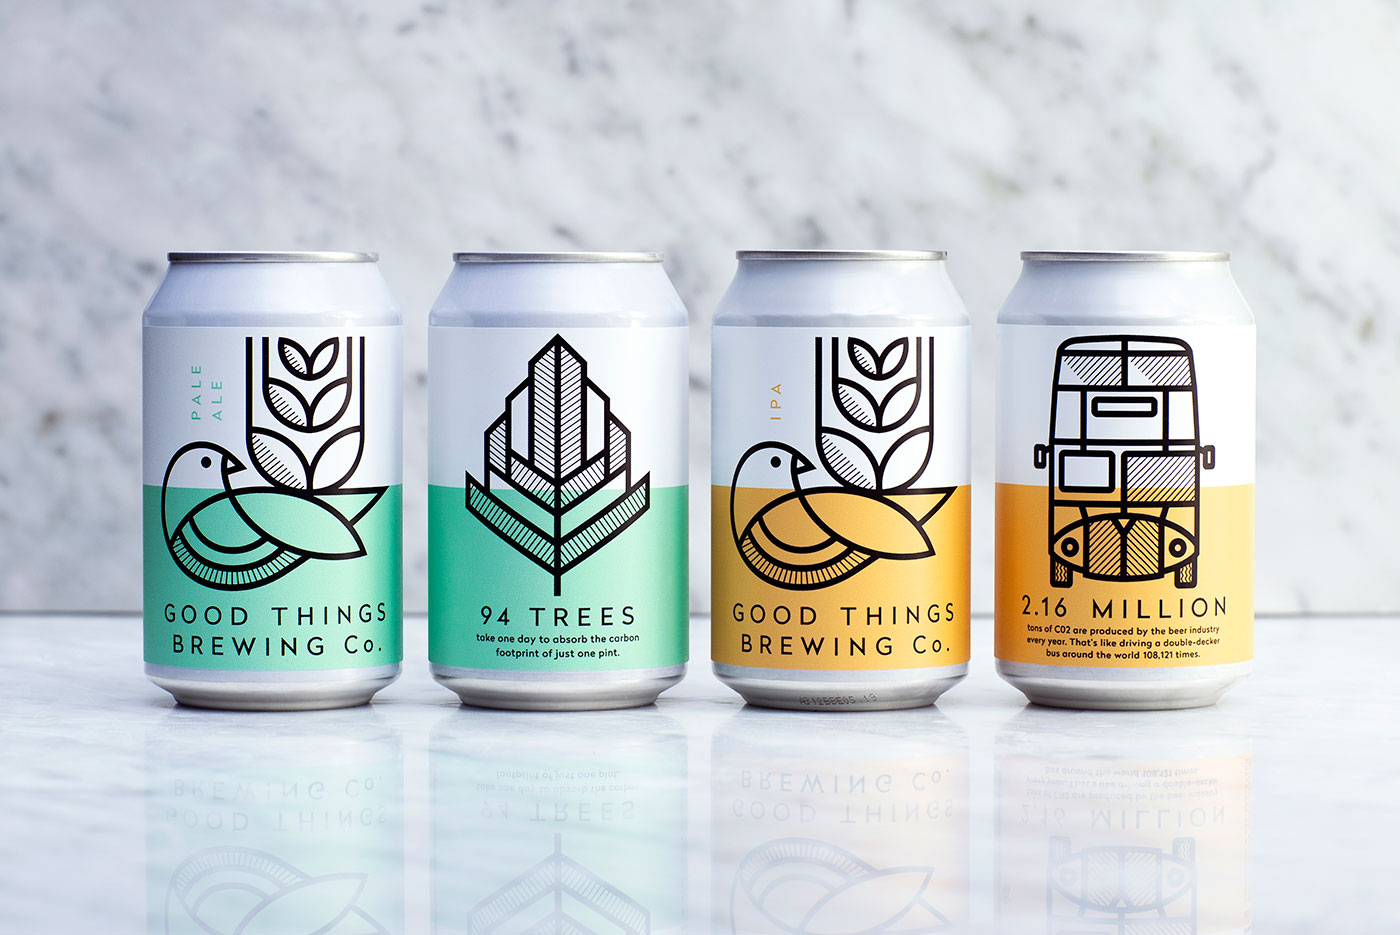 Good Things Brewing Co., branding by Horse, London | Identity Designed